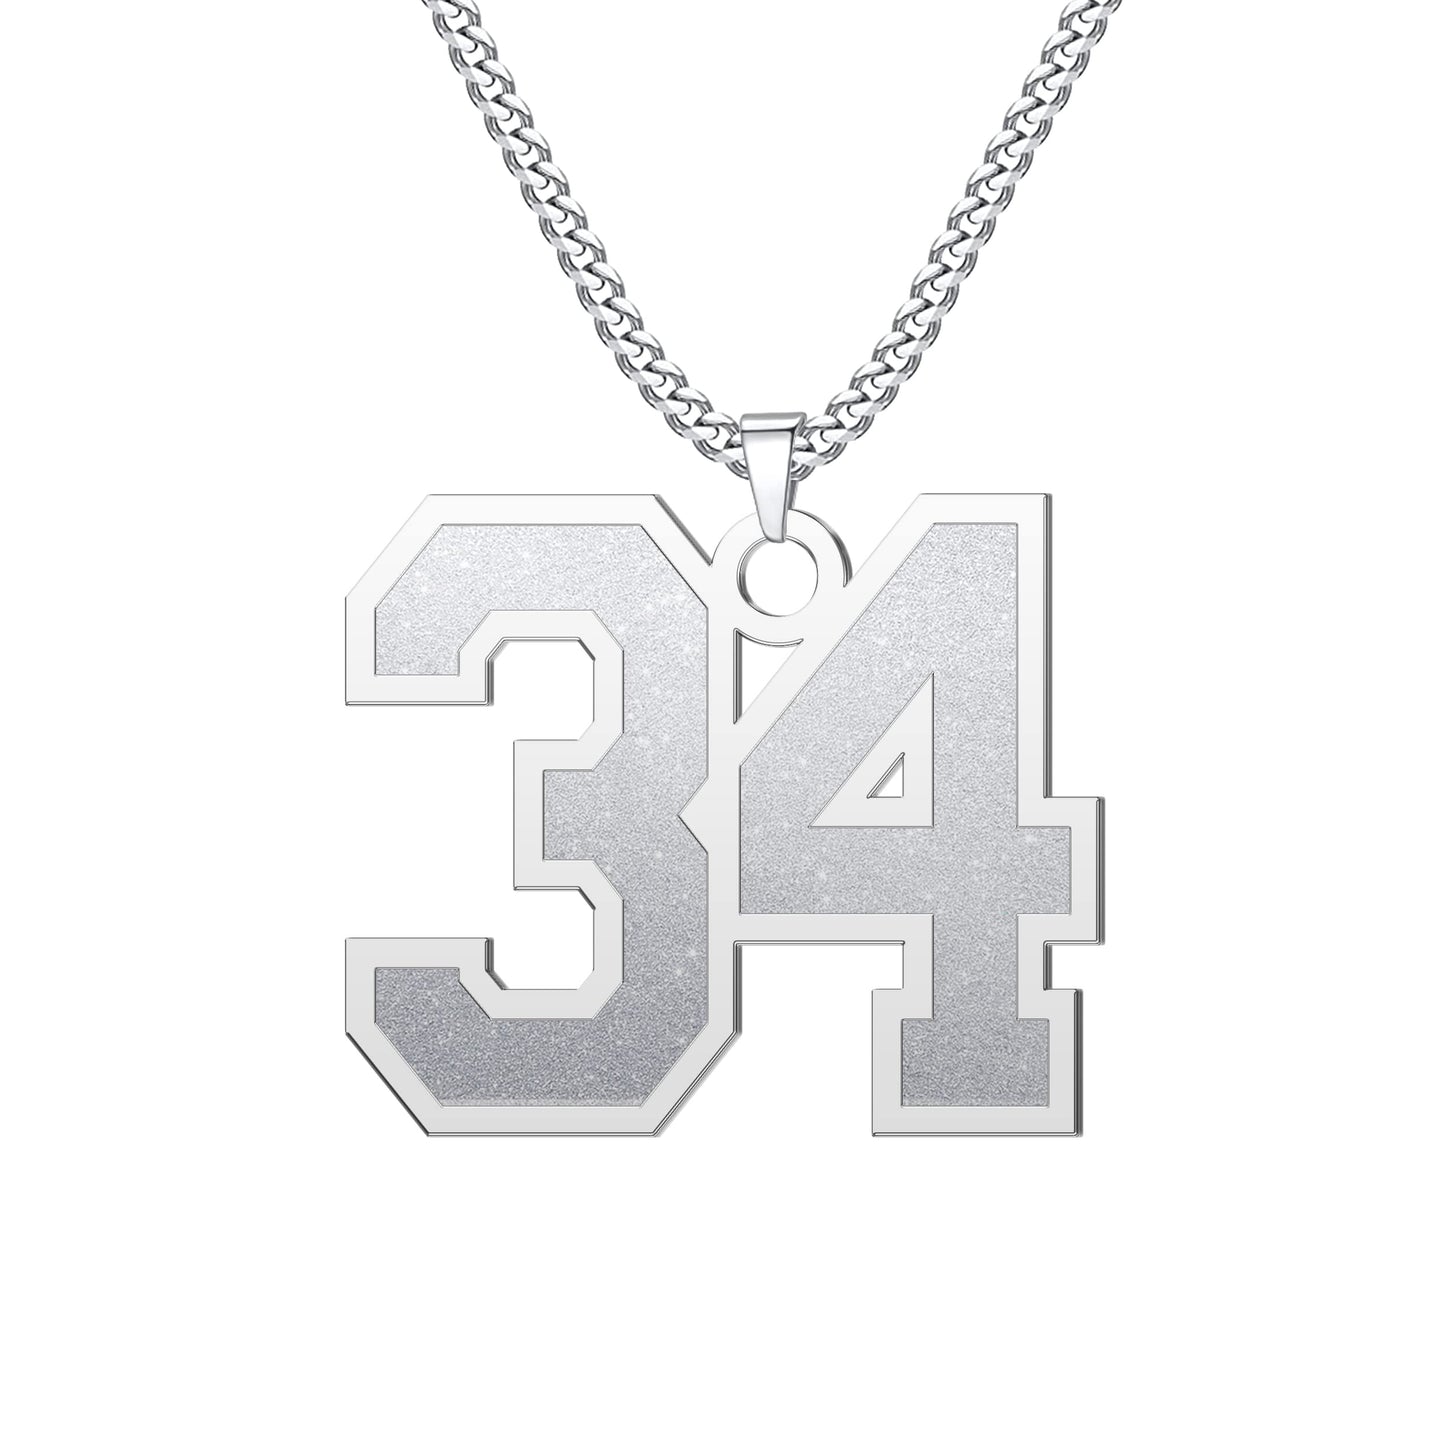 JSJOY Number Necklaces for Athletes 00-99 Jersey Number Chain Personalized Custom with Name Sports Soccer Football Basketball Baseball for Men Girls